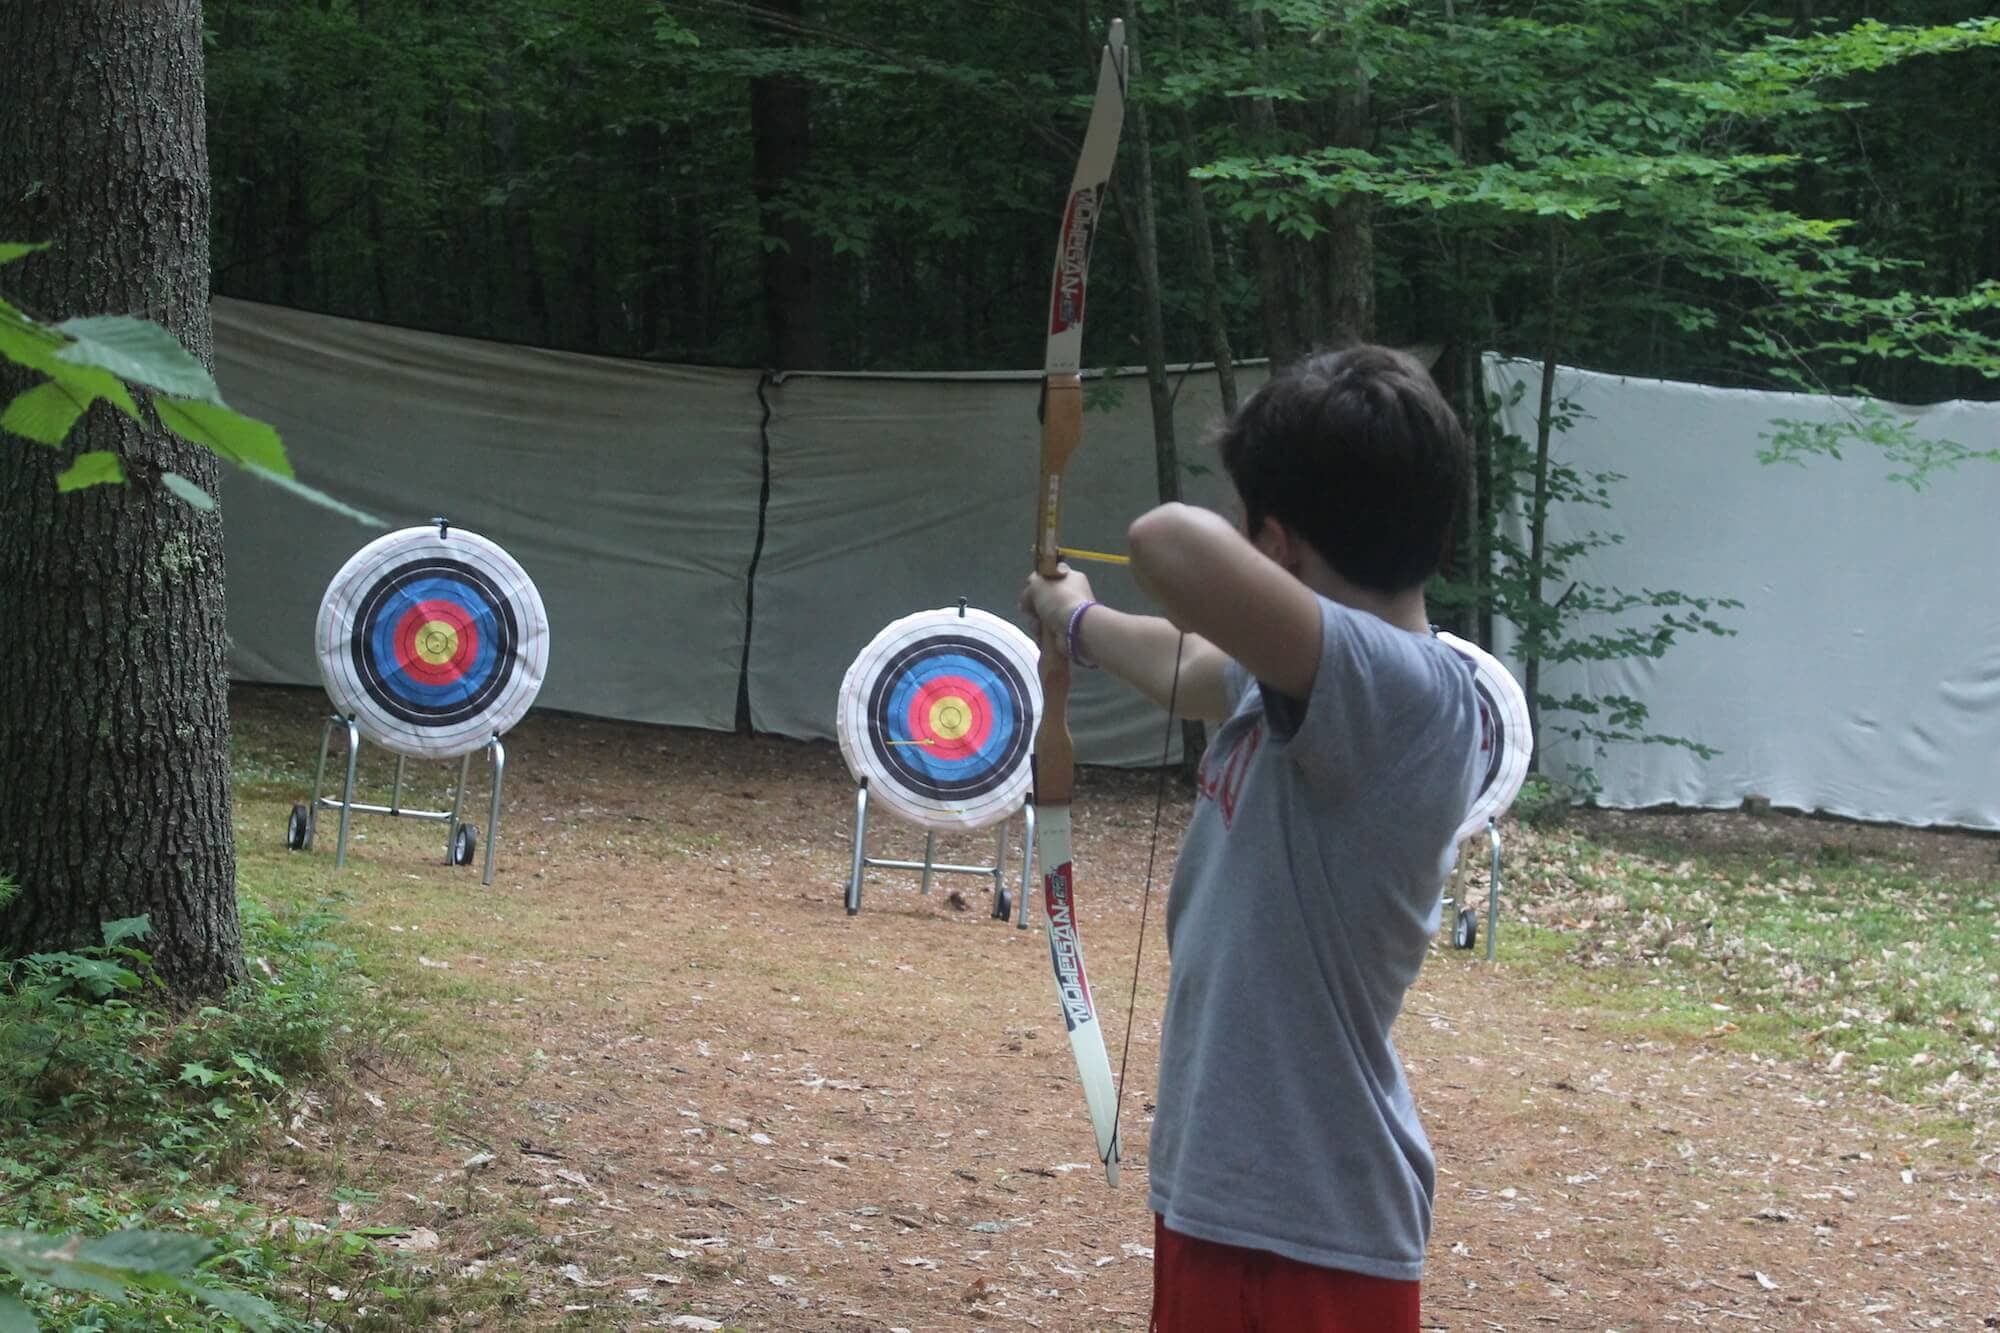 Archery at Netop Summer Camp